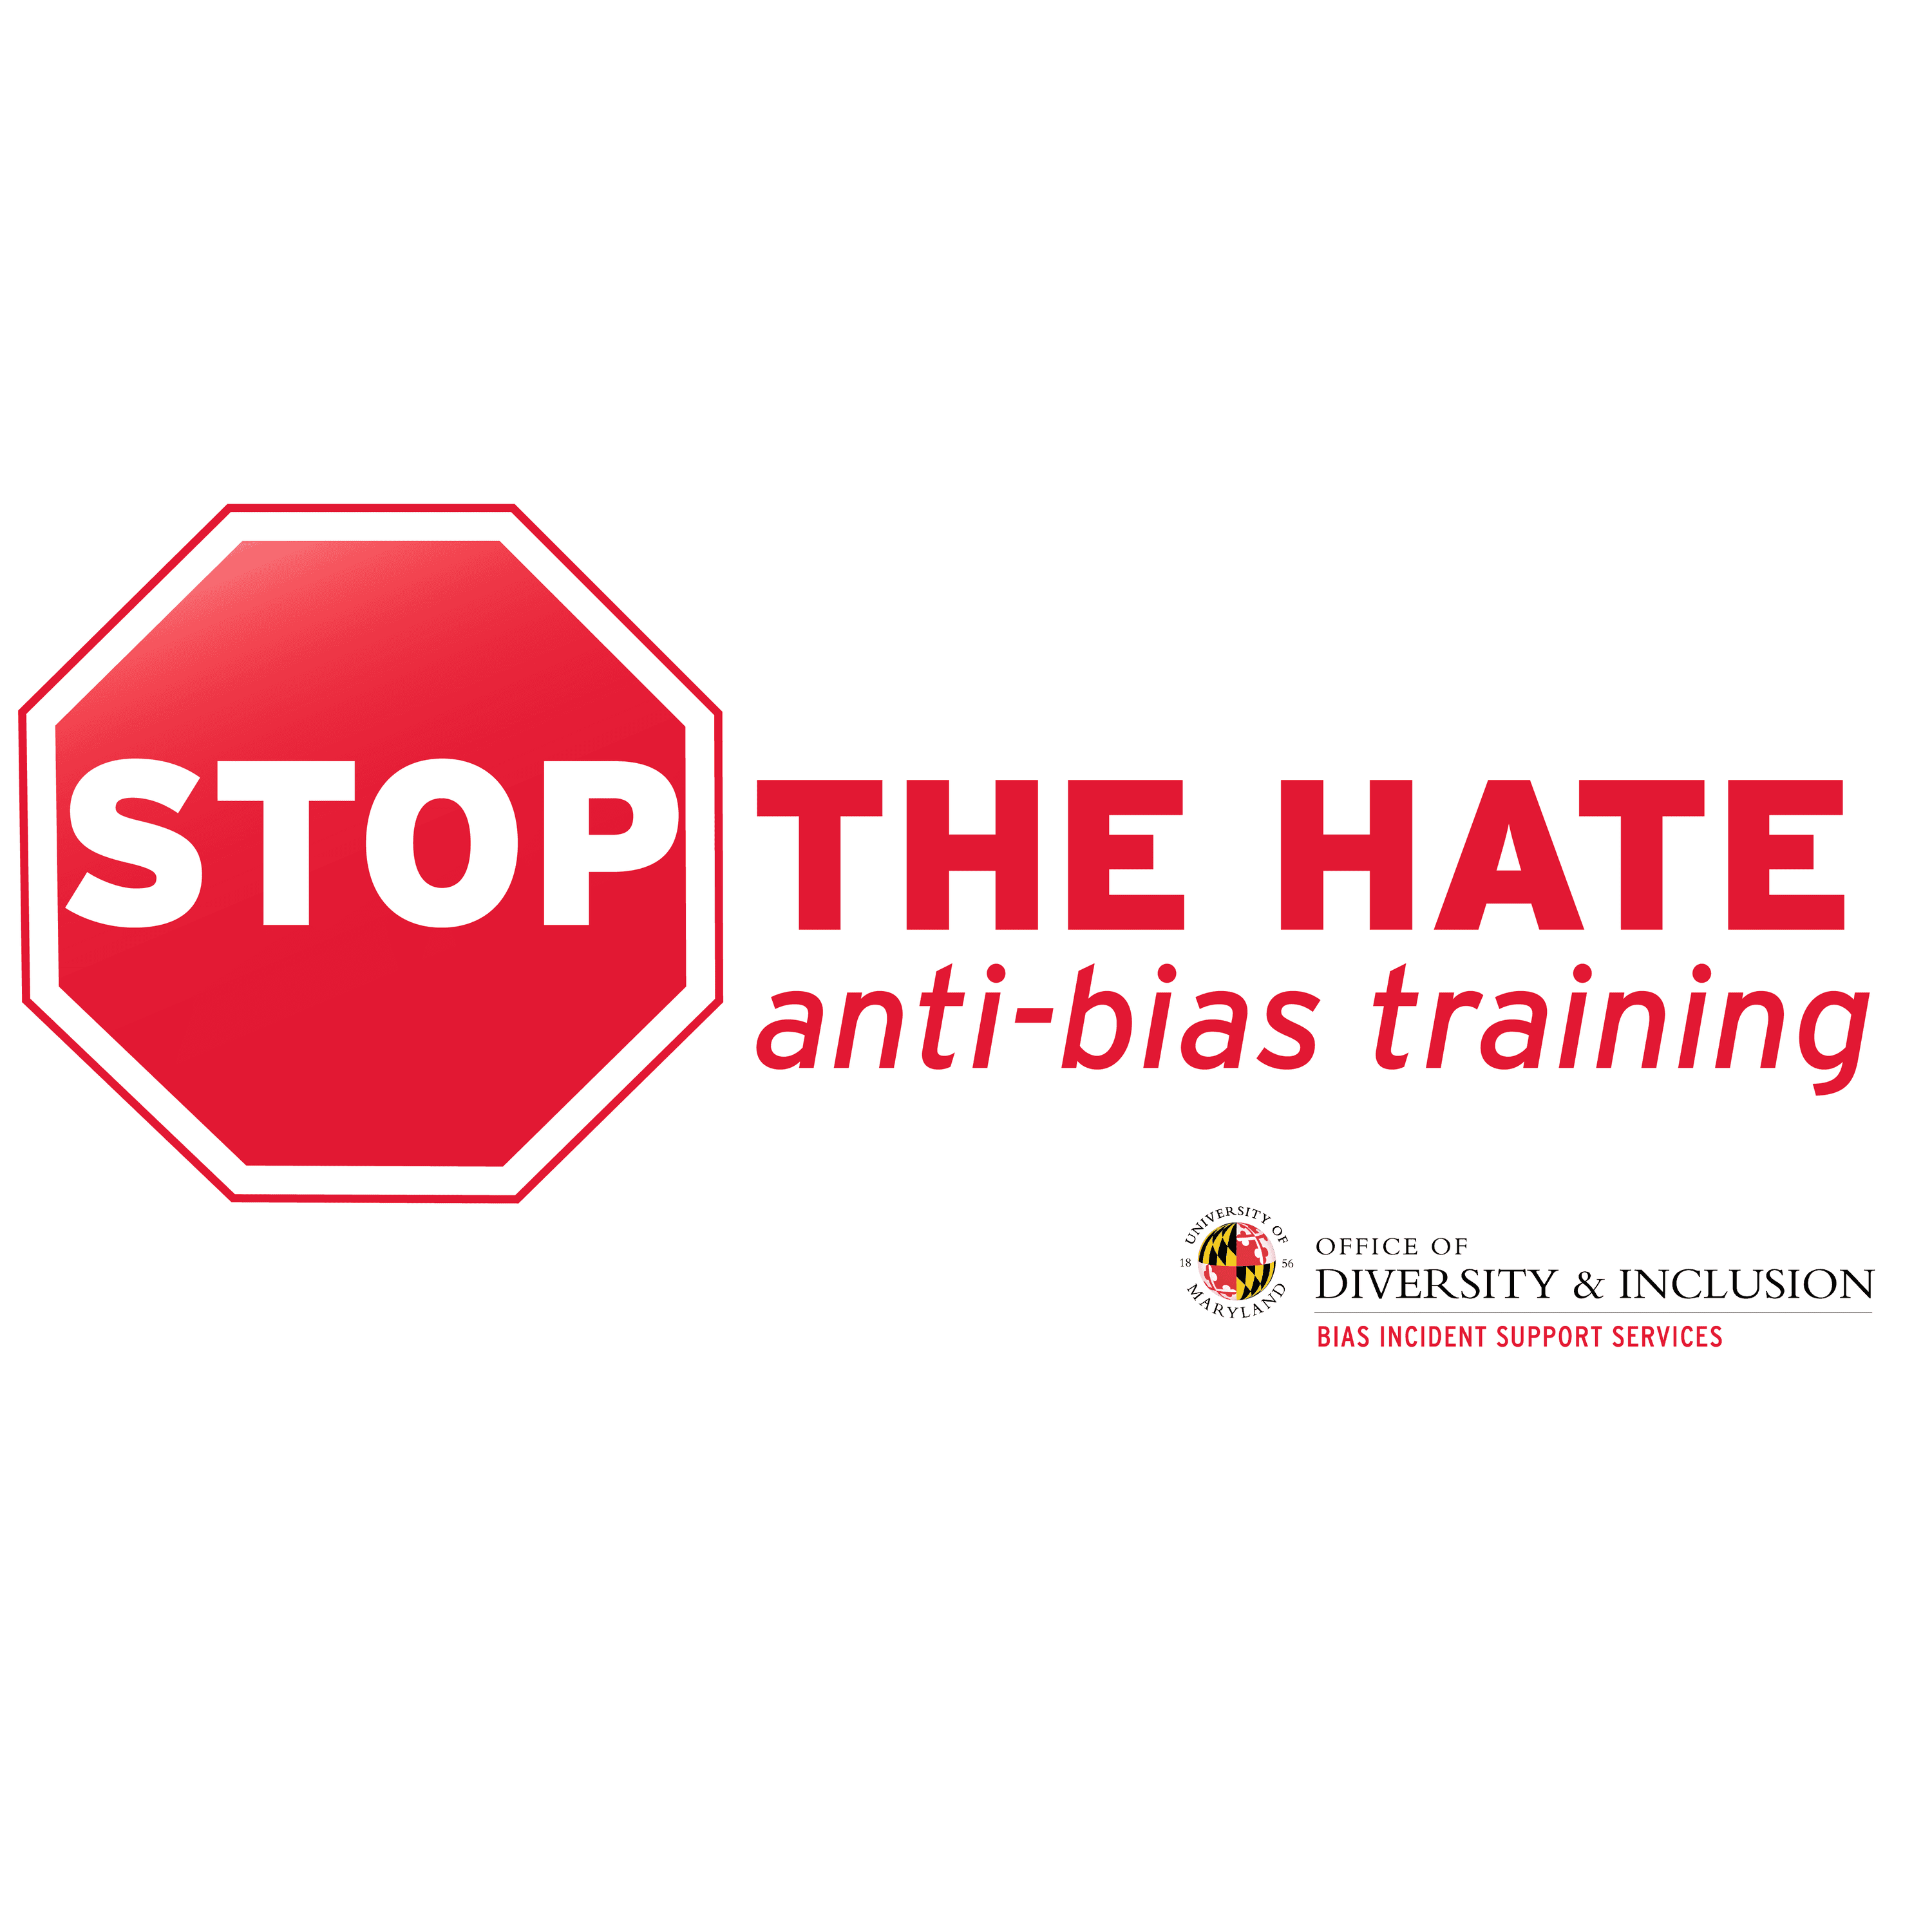 Red STOP sign with the words "Stop the Hate anti-bias training" to the right of it